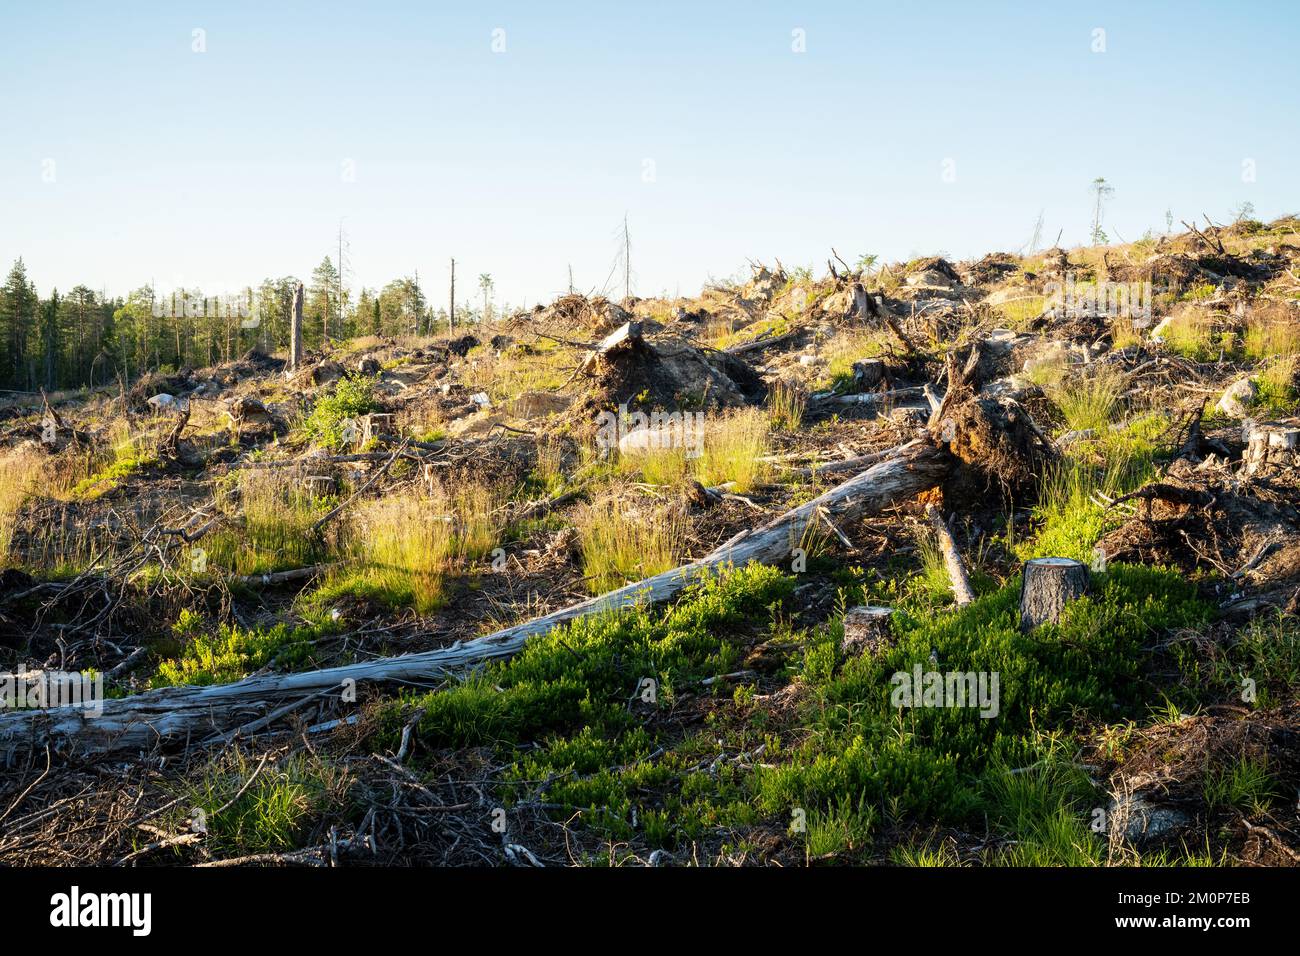 A mineralized clear-cut area with a fallen trunk in the foreground near Hossa, Northern Finland Stock Photo